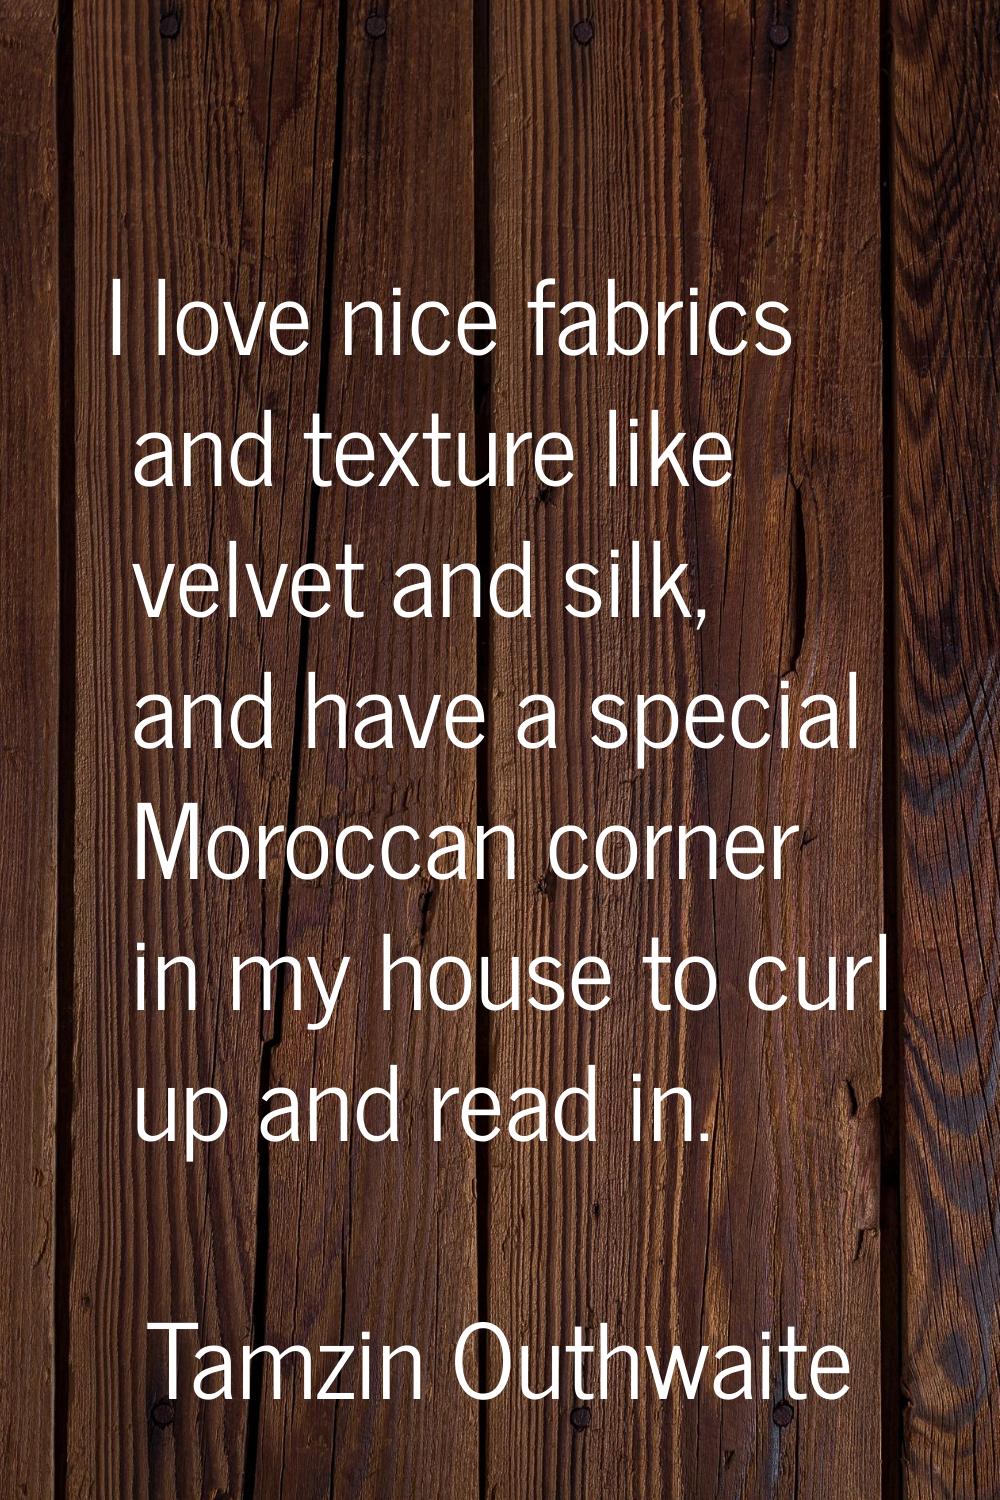 I love nice fabrics and texture like velvet and silk, and have a special Moroccan corner in my hous